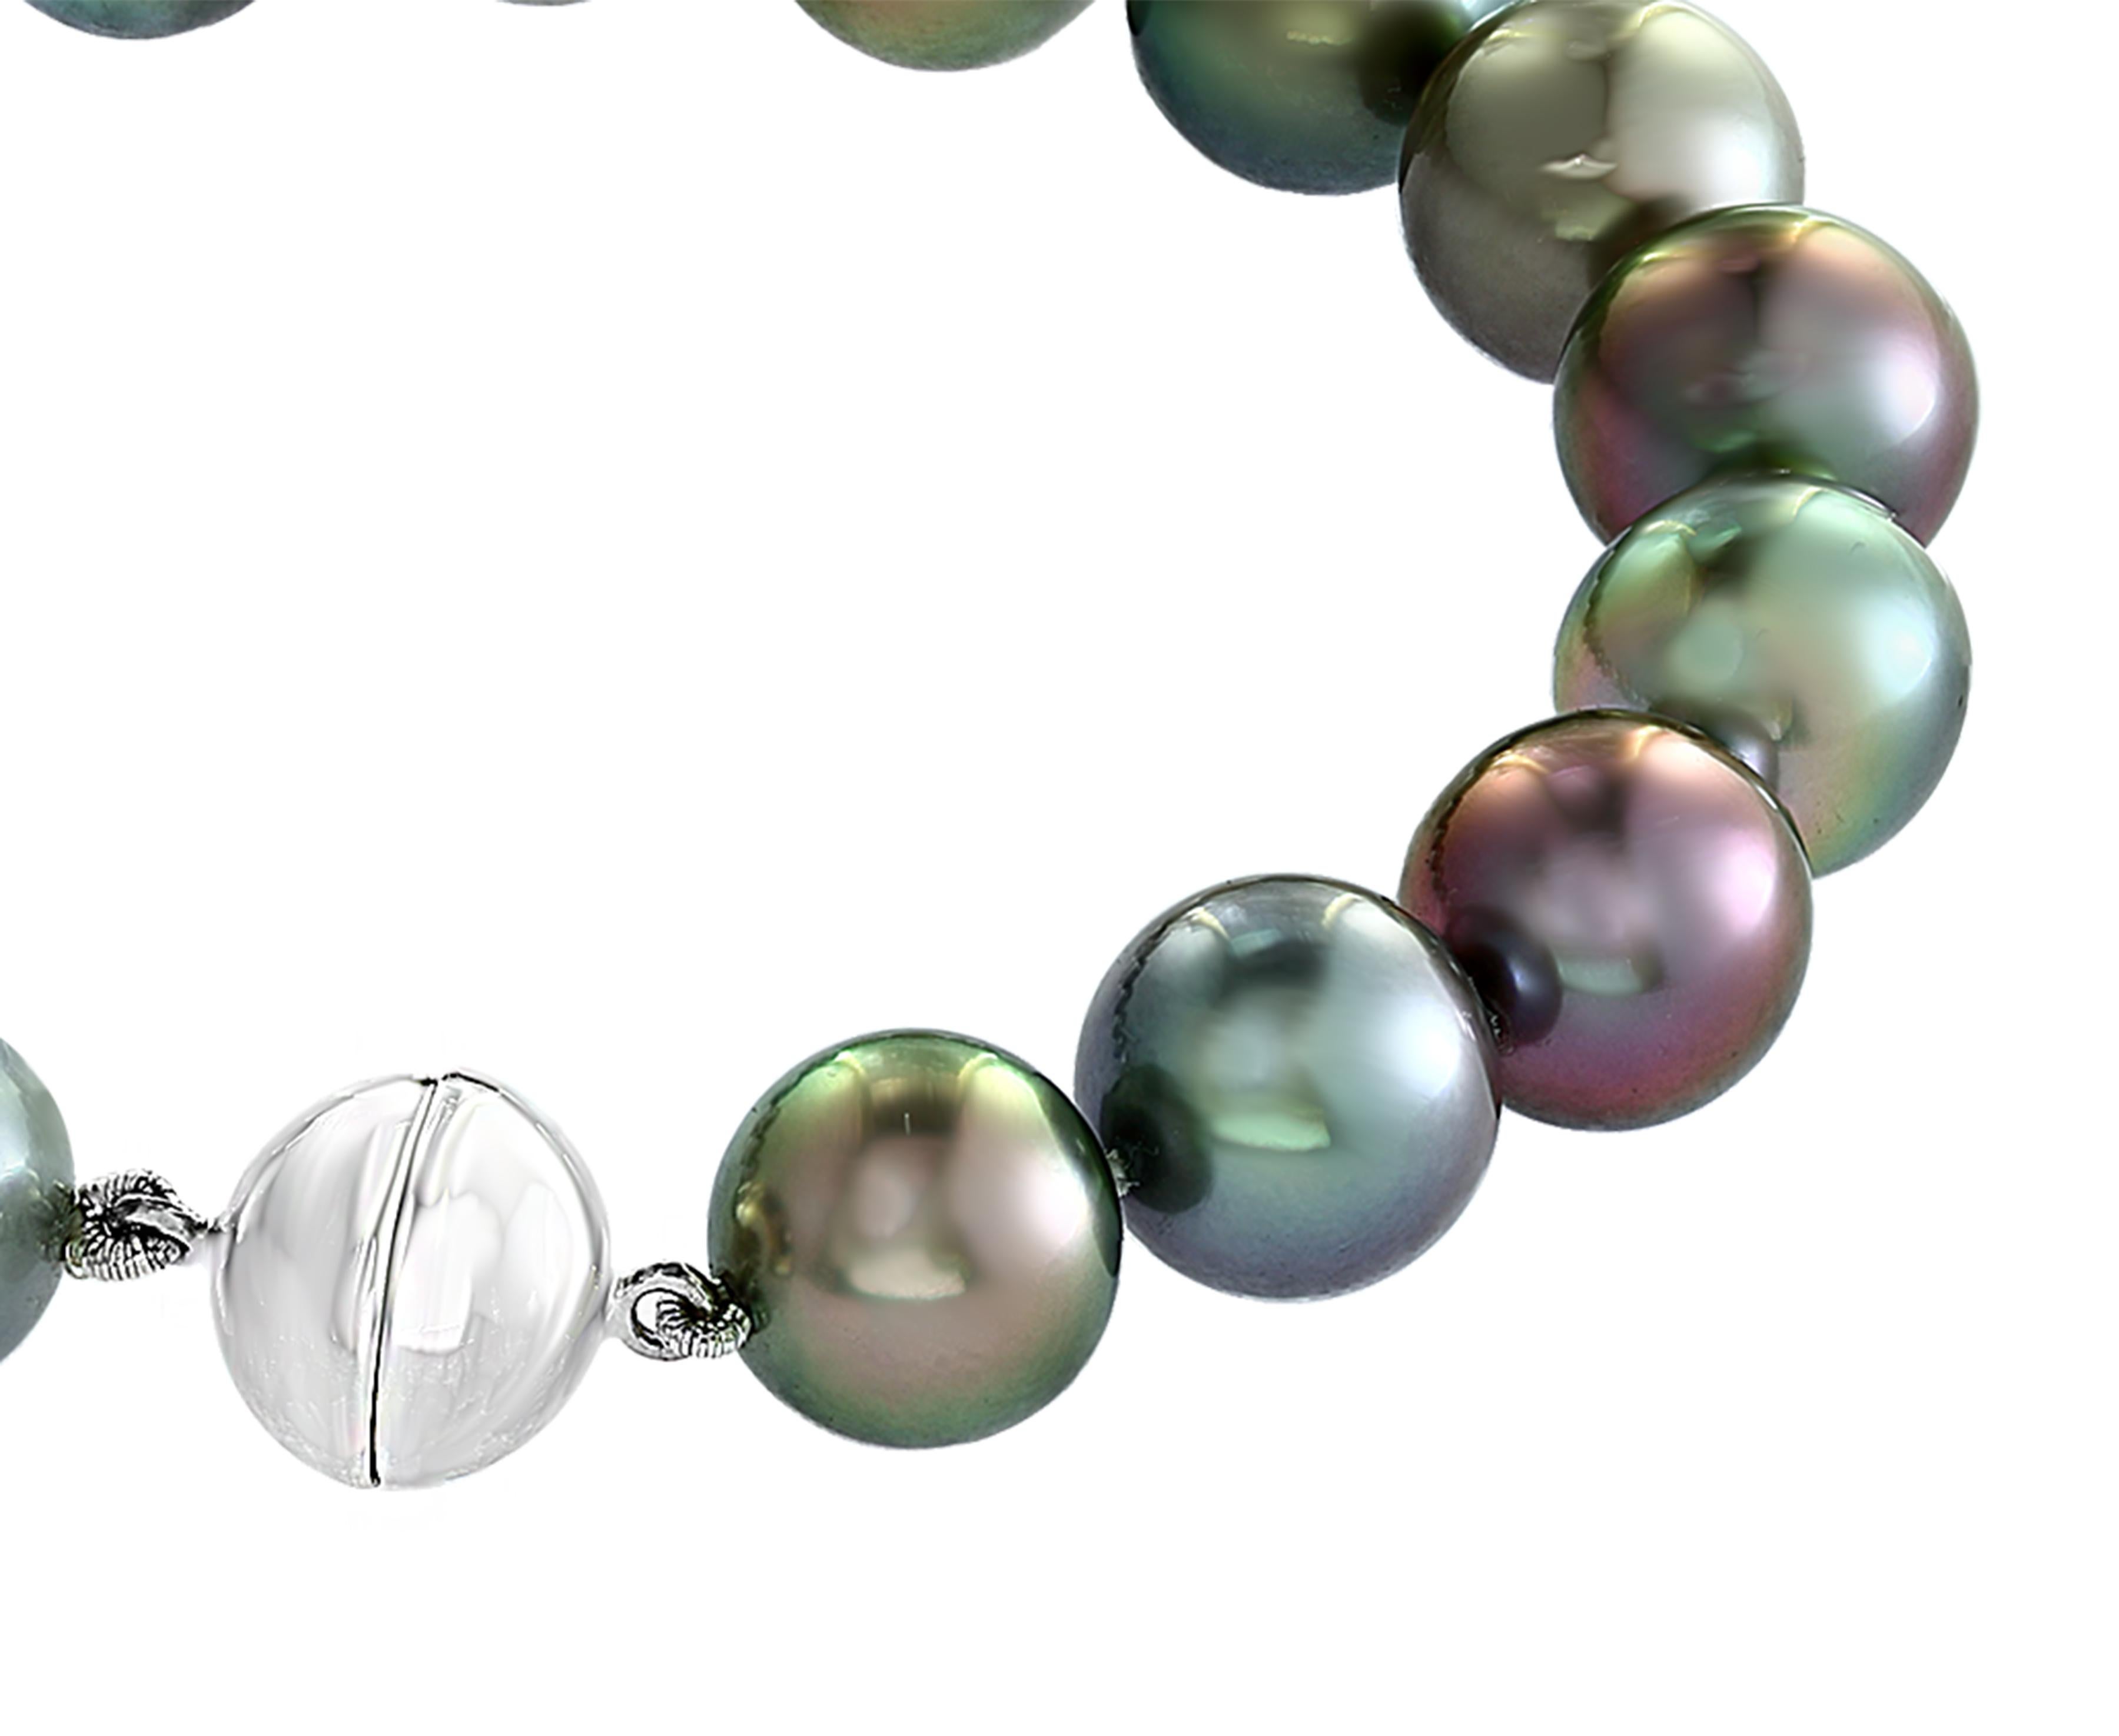 This South Sea multi-colored Tahitian cultured pearl bracelet adds a classy complement to any outfit. The pearls measures 10-11mm. The magnetic ball clasp is 18K White Gold. This stunning bracelet is an absolute show-stopper!